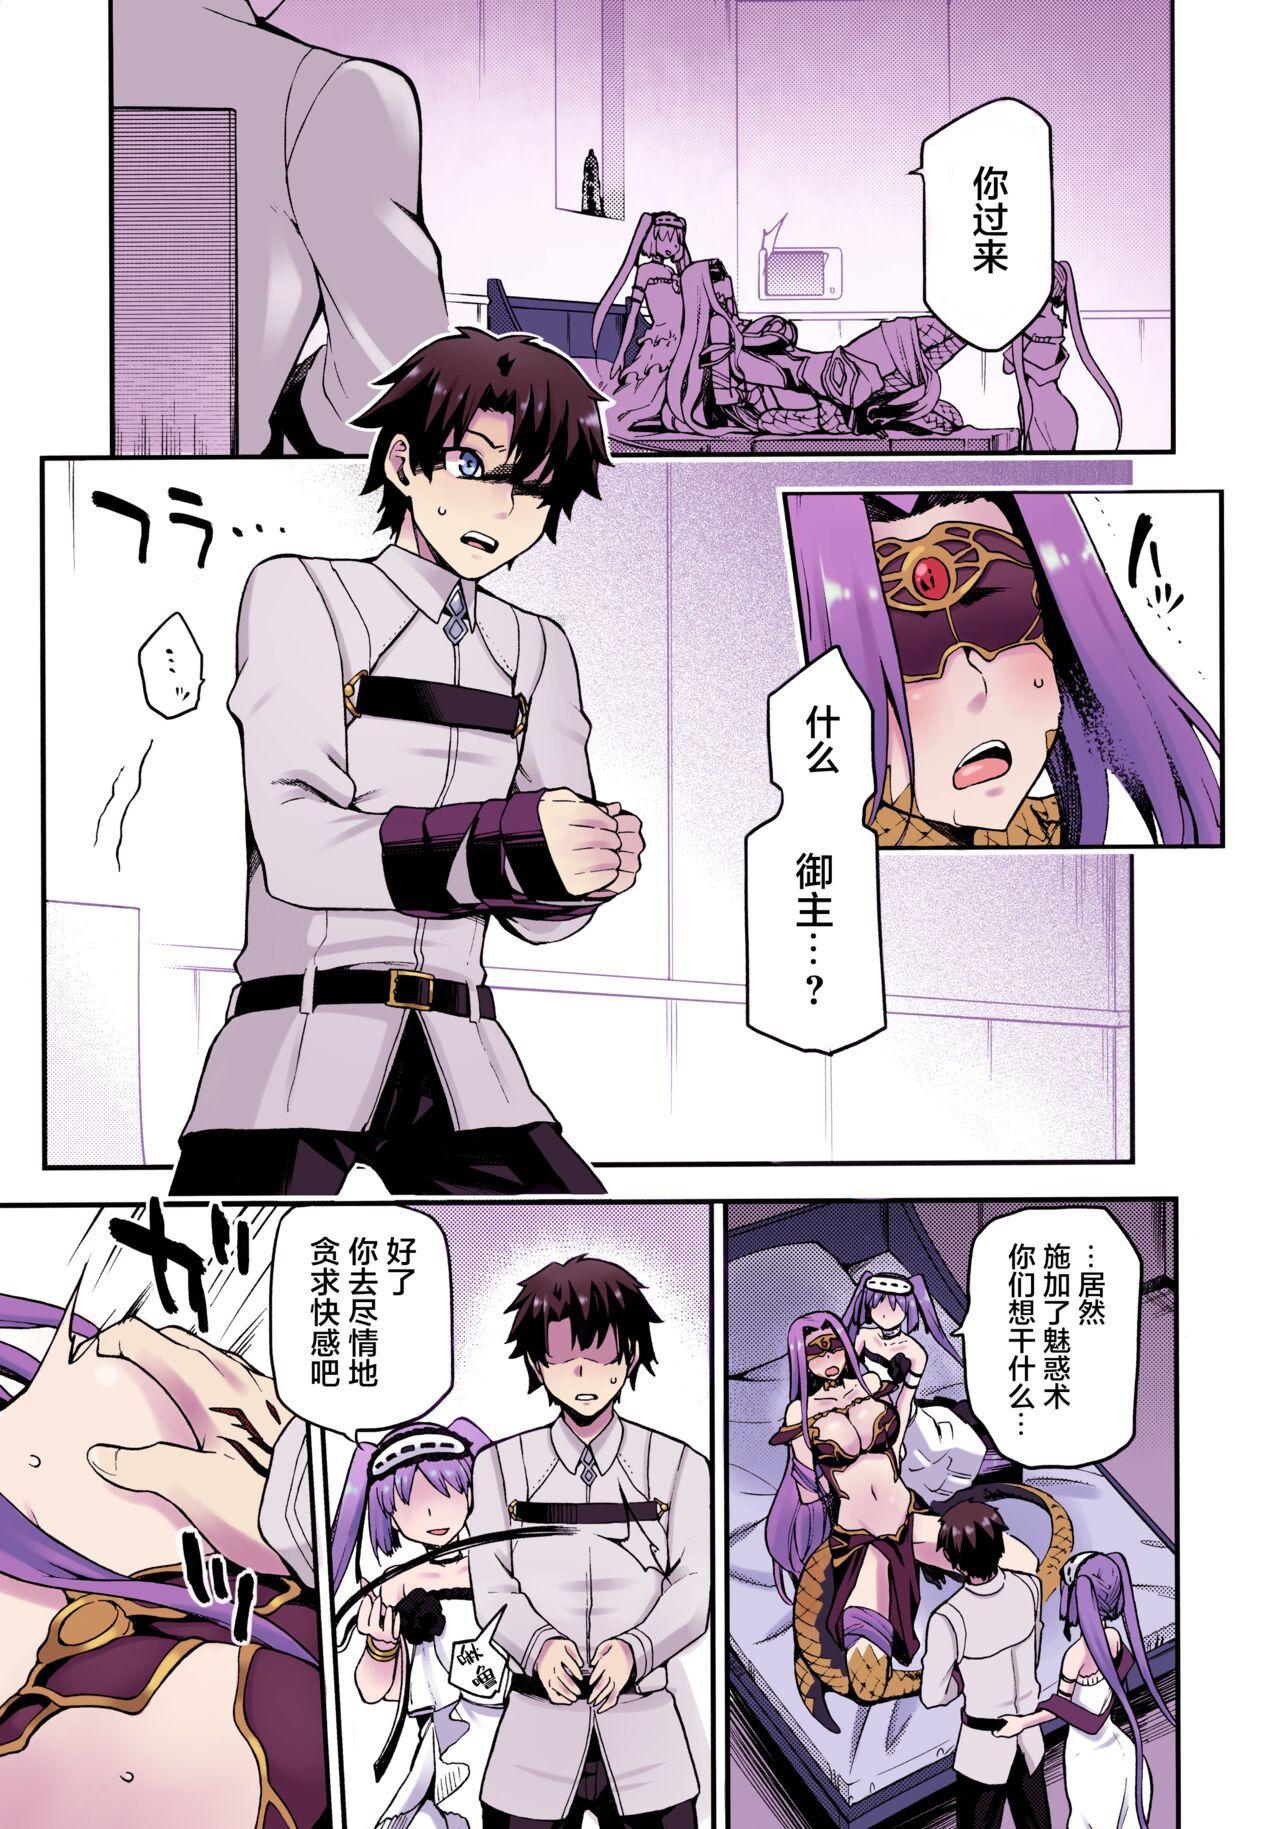 Furry Hebigami no Honnou - Fate grand order Mulher - Page 8